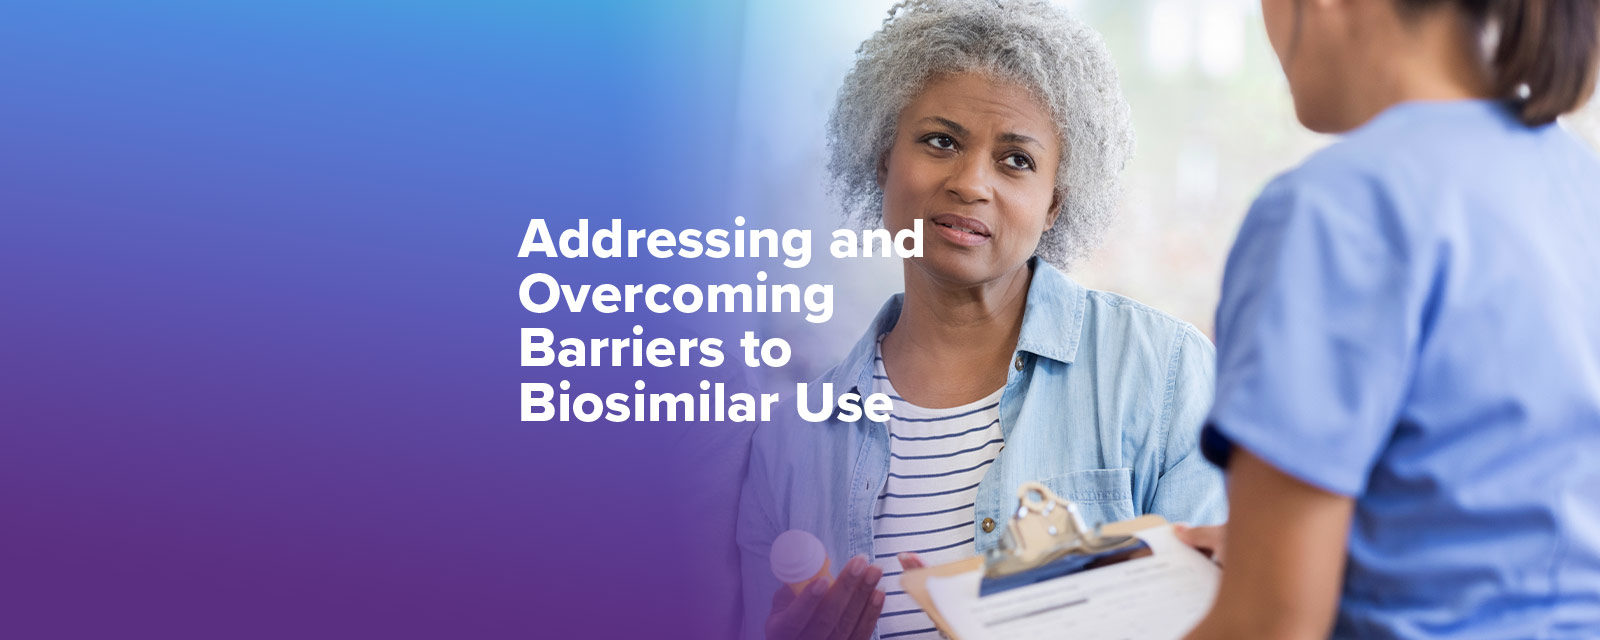 Addressing and Overcoming Barriers to Biosimilar Use